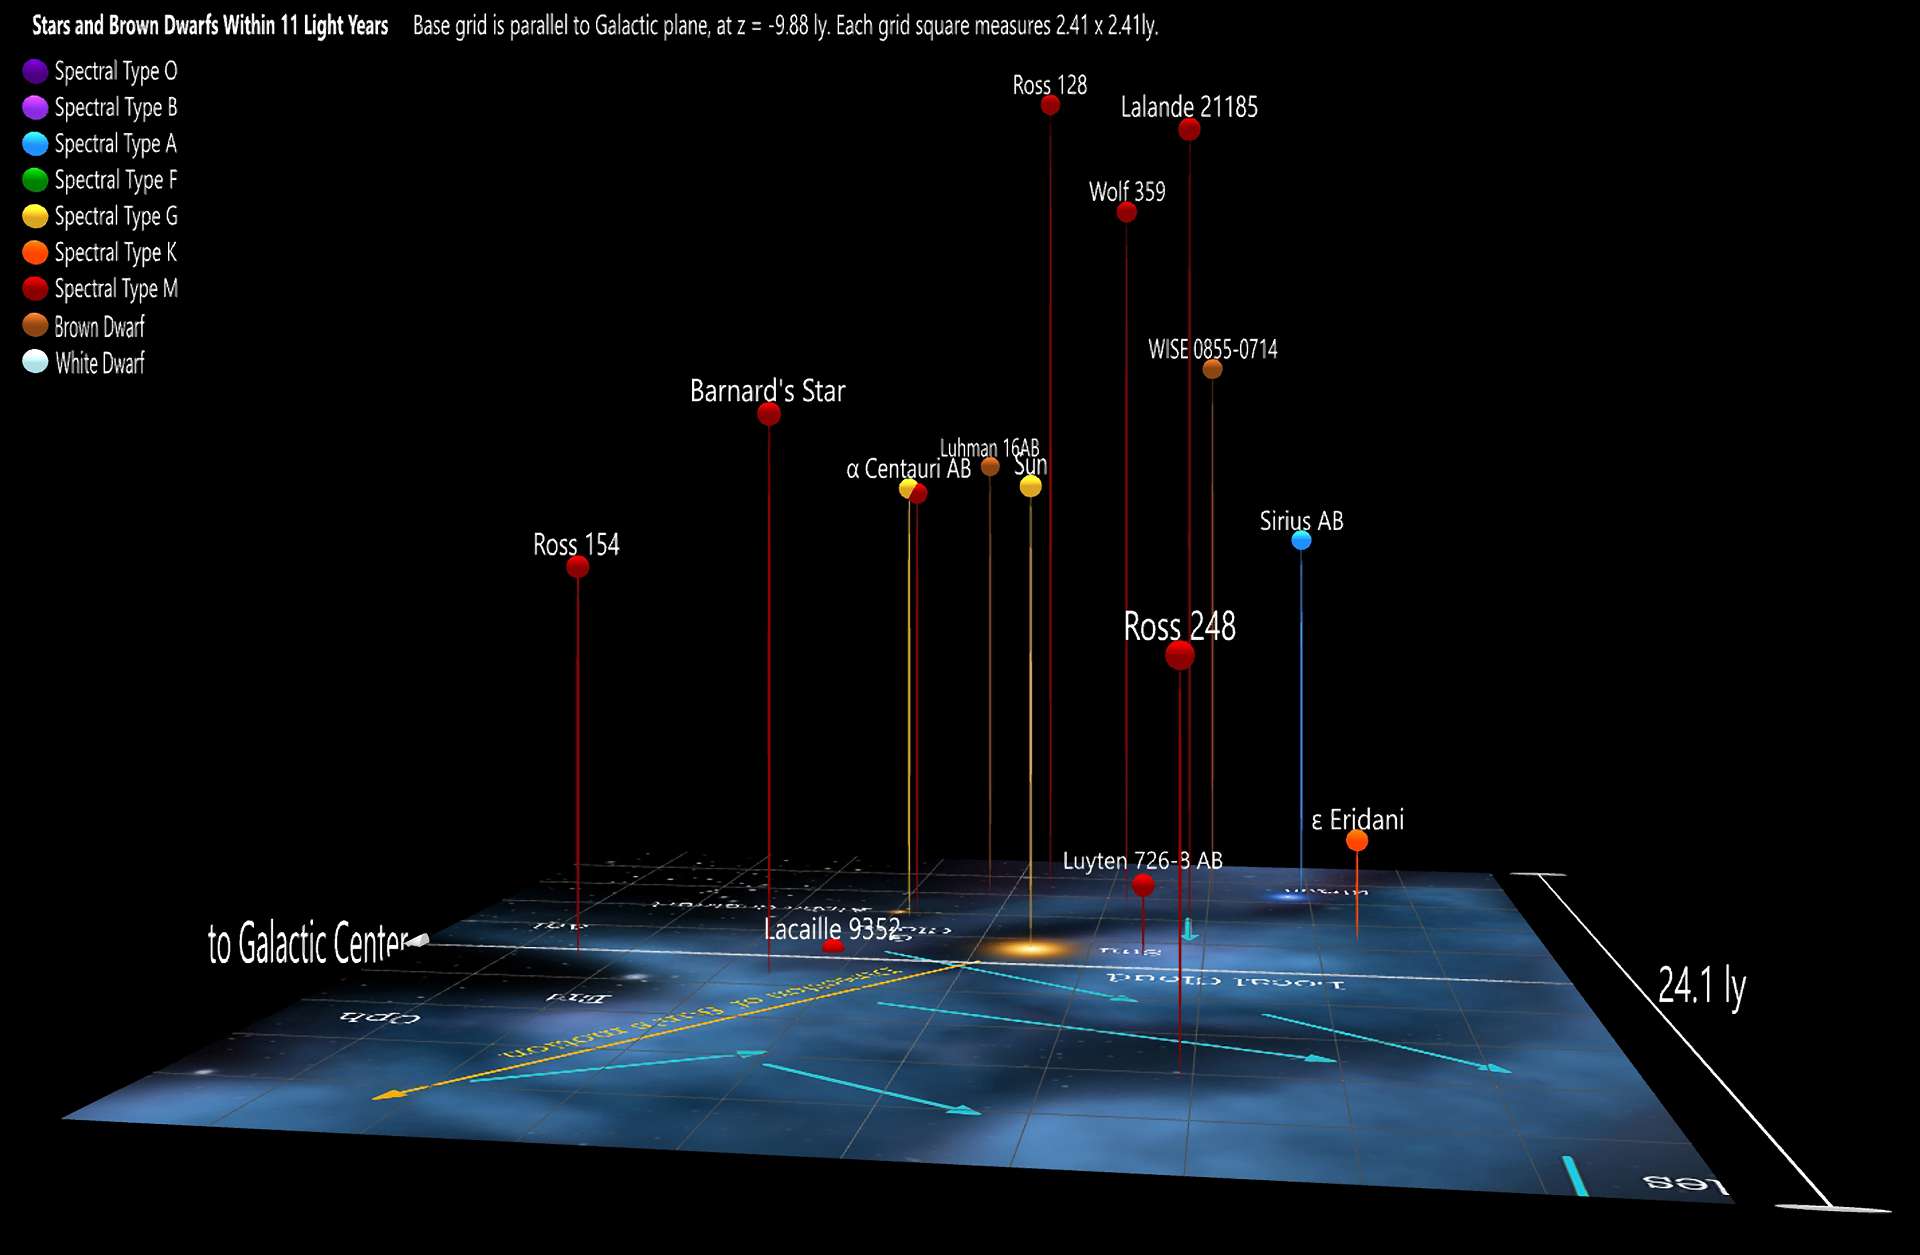 Stars and Brown Dwarfs within 11 Light Years of the Sun